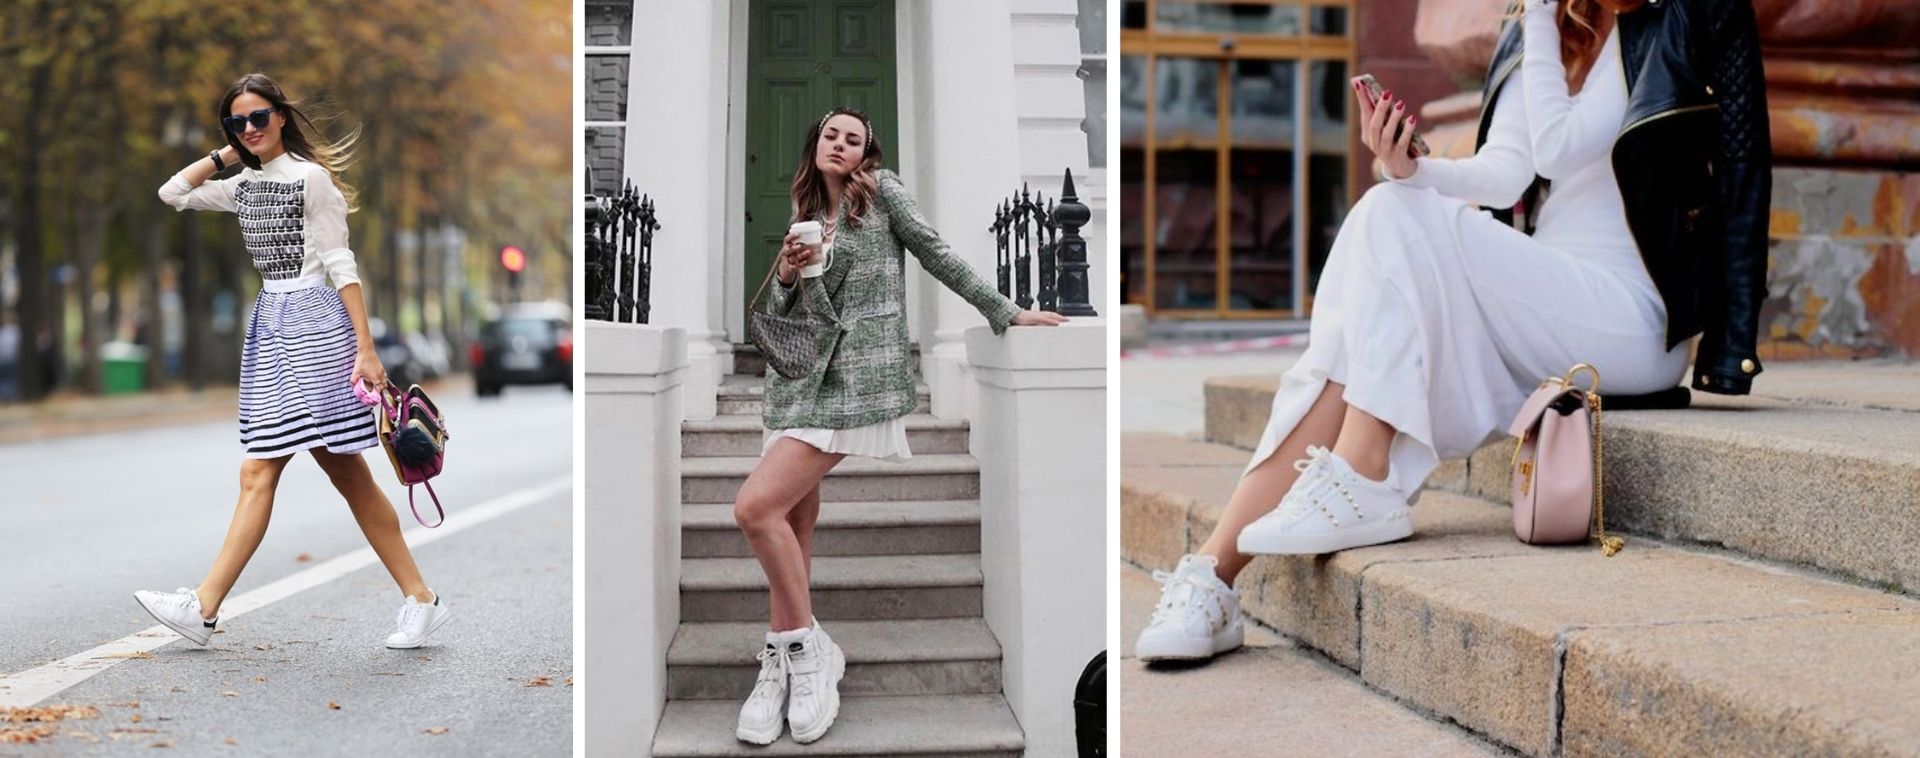 How to Wear a Dress and Sneakers